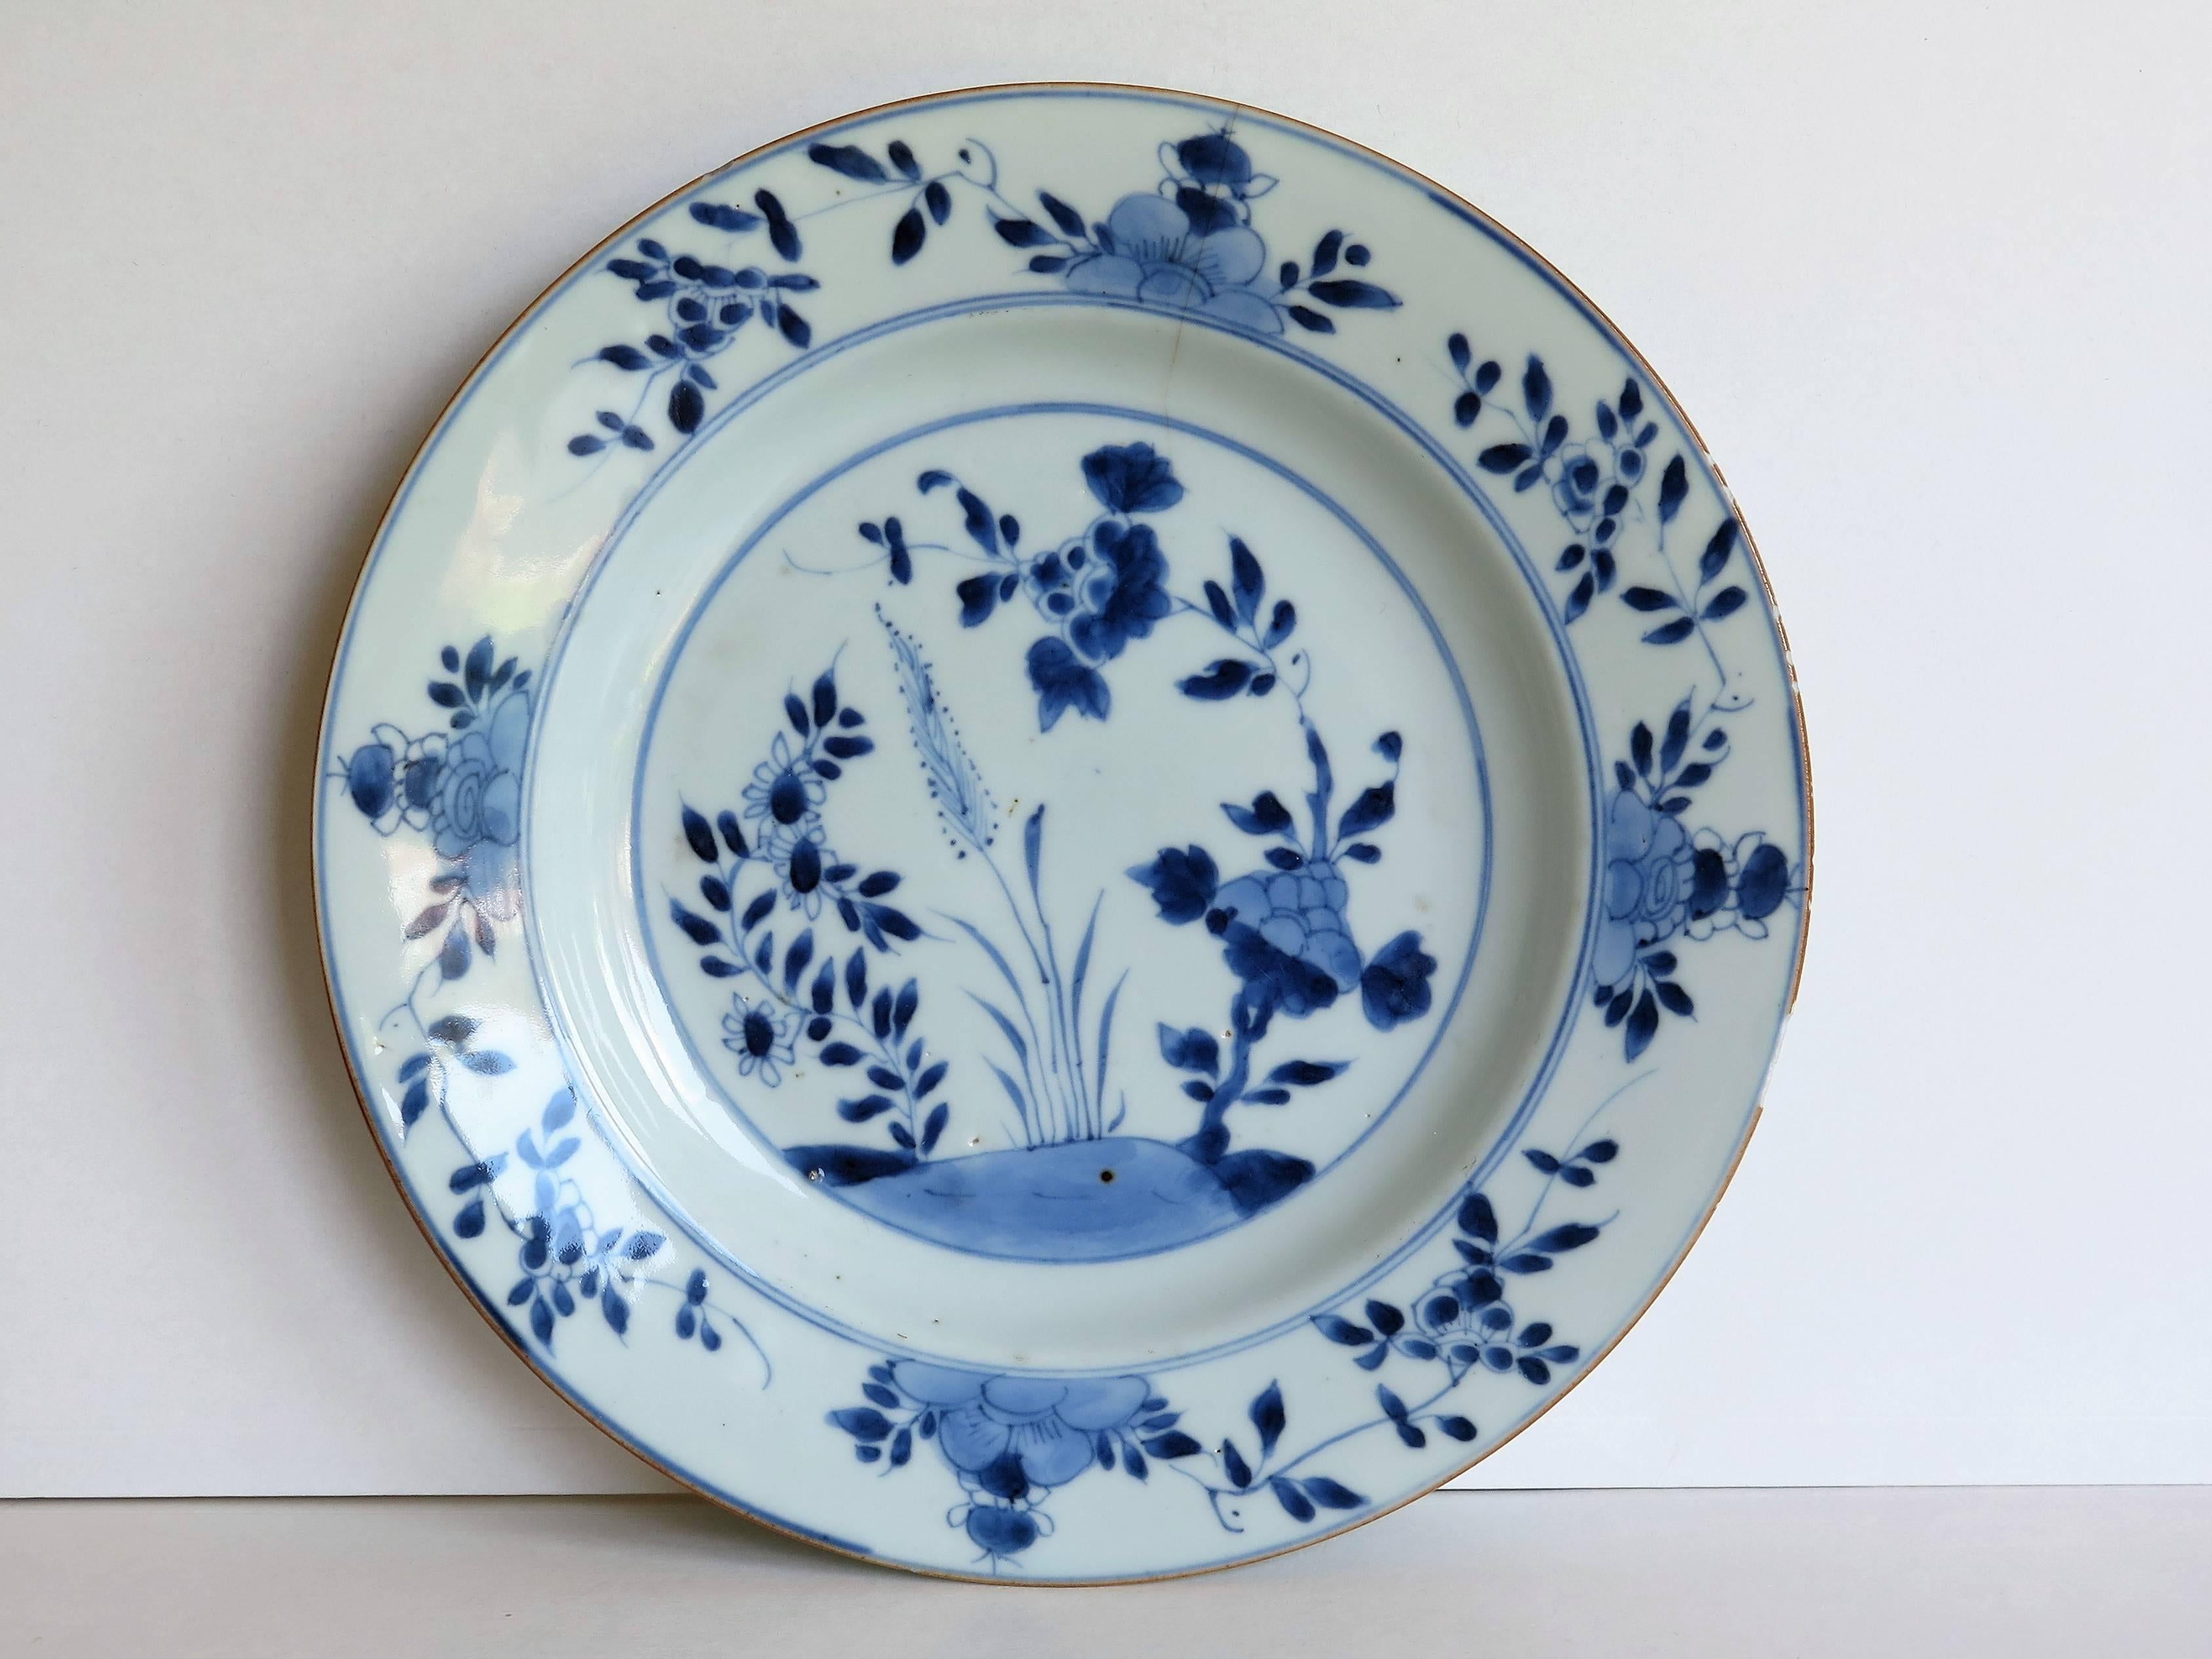 Hand-Painted 18th Century Chinese Export Porcelain Plate Blue and White, Qing Circa 1735